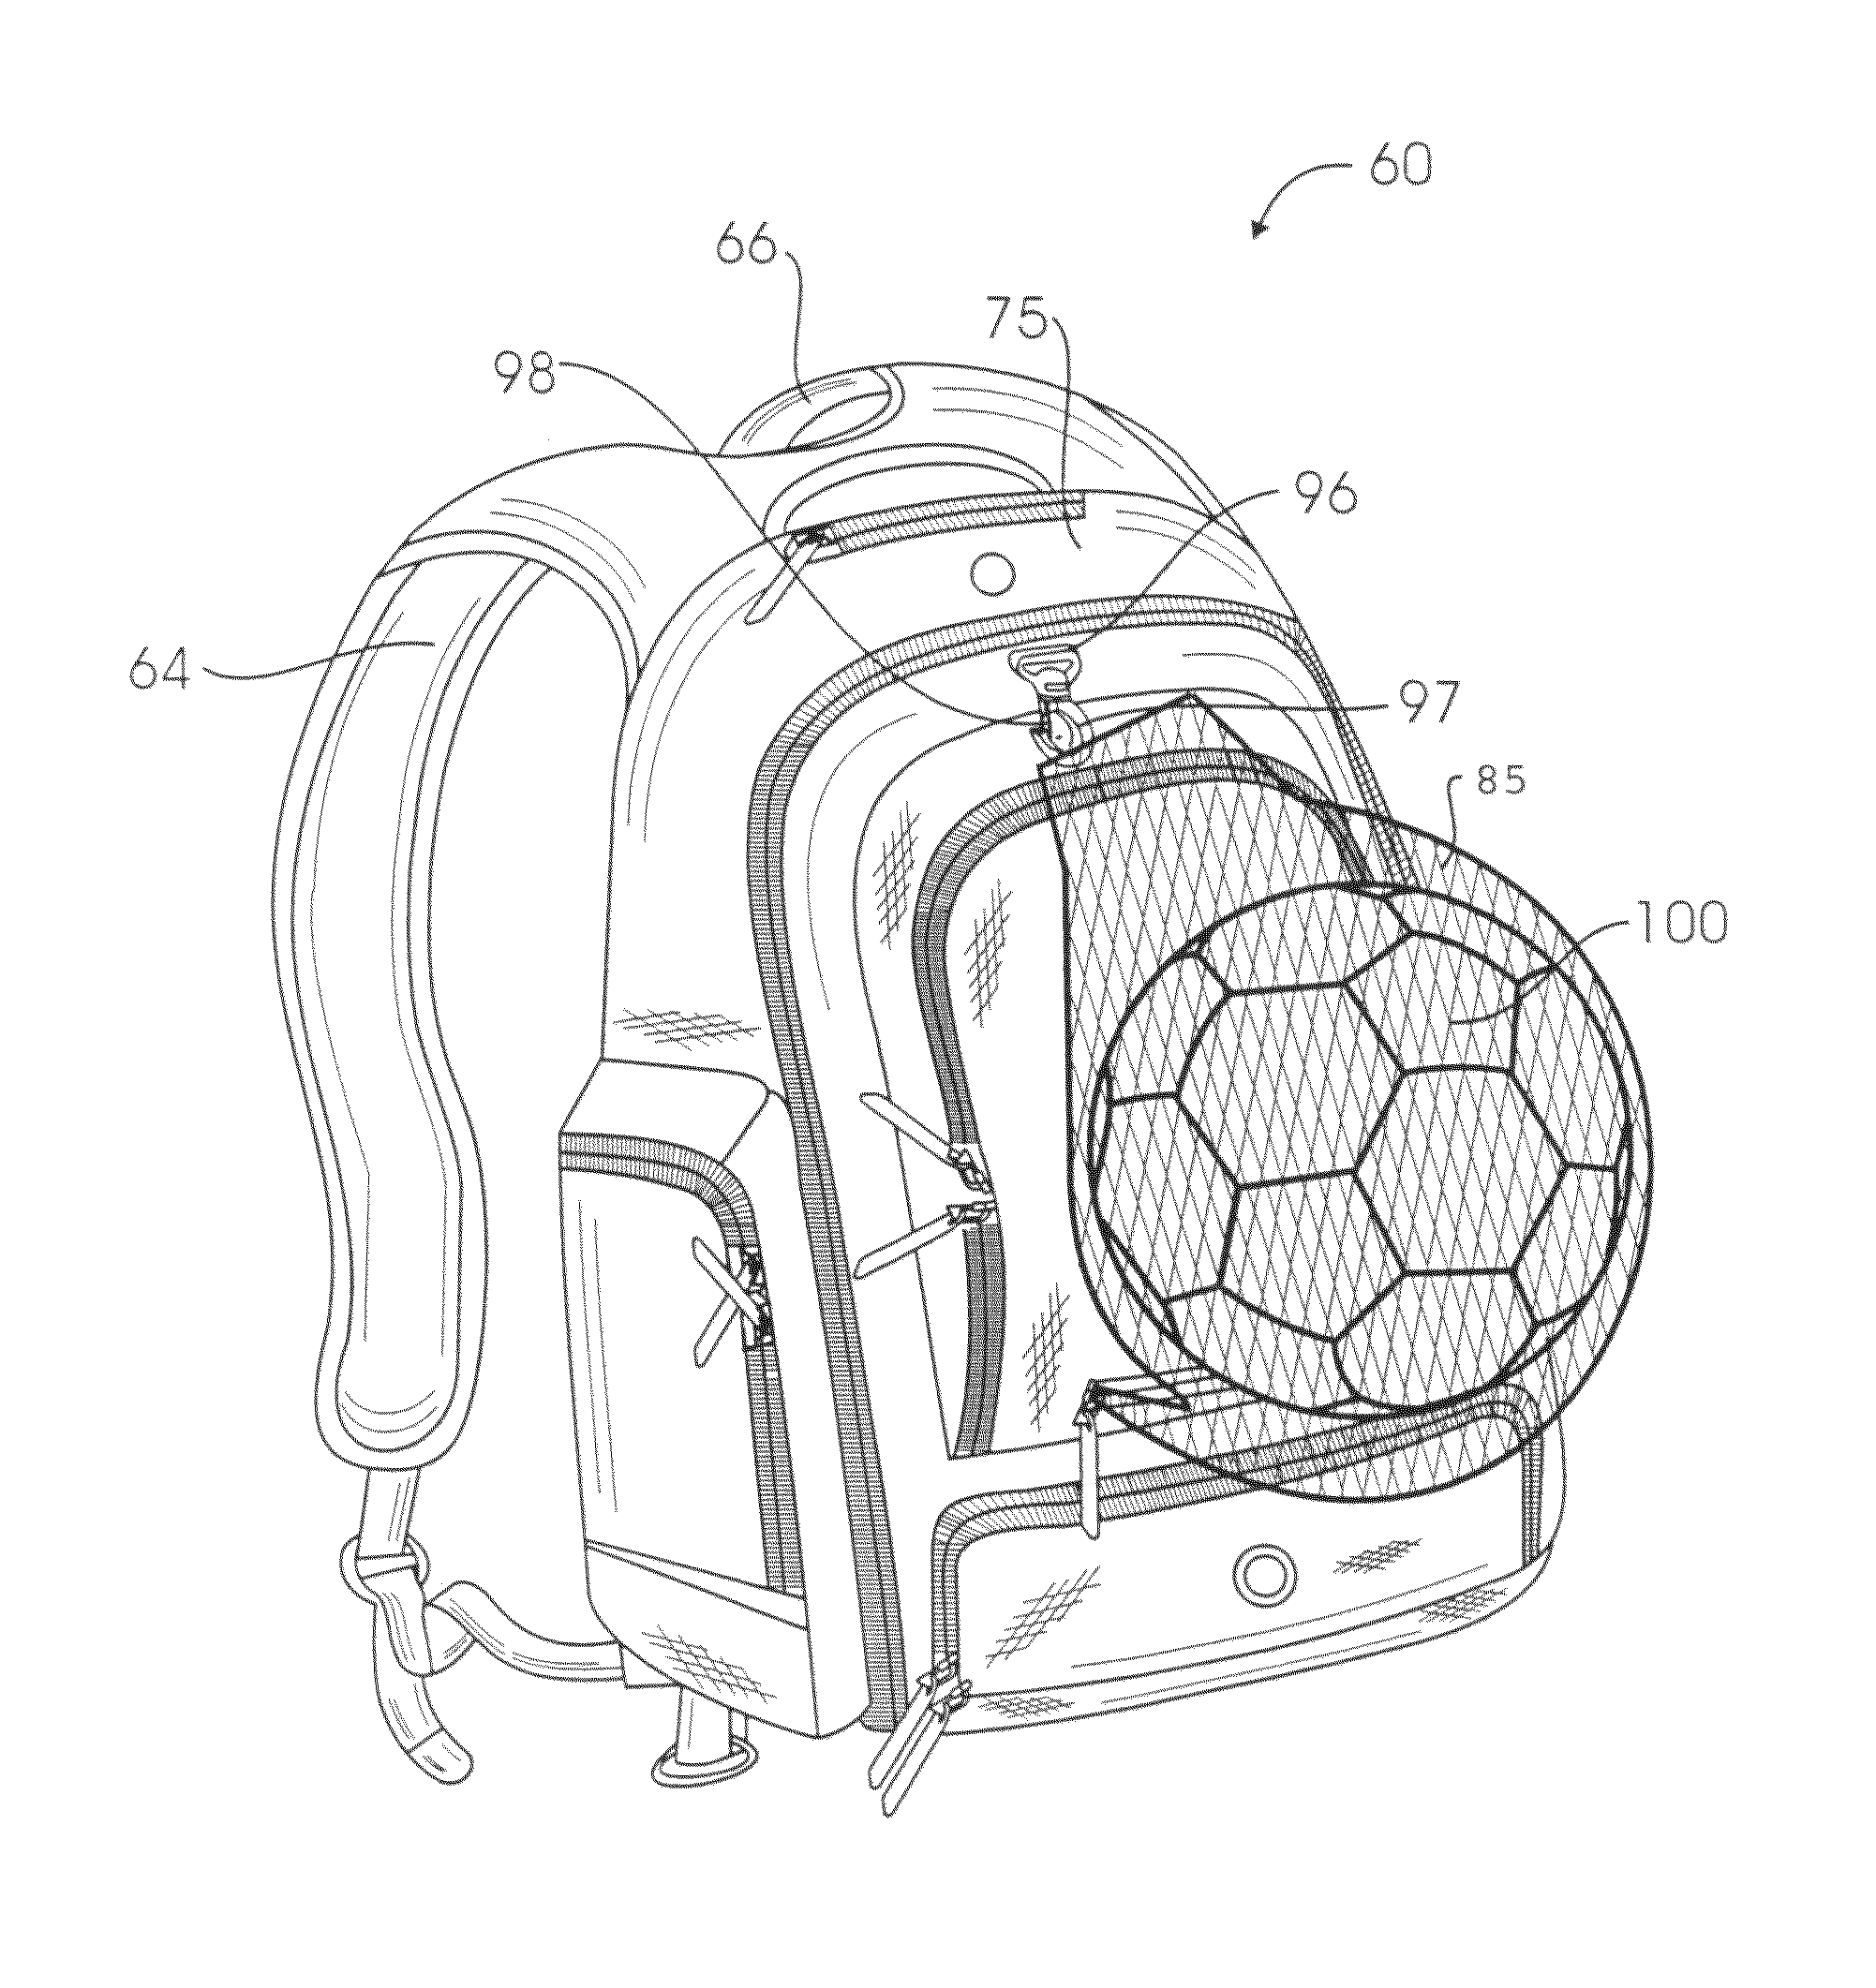 Carrying bags and backpacks with expandable retainer to contain and securely carry large objects